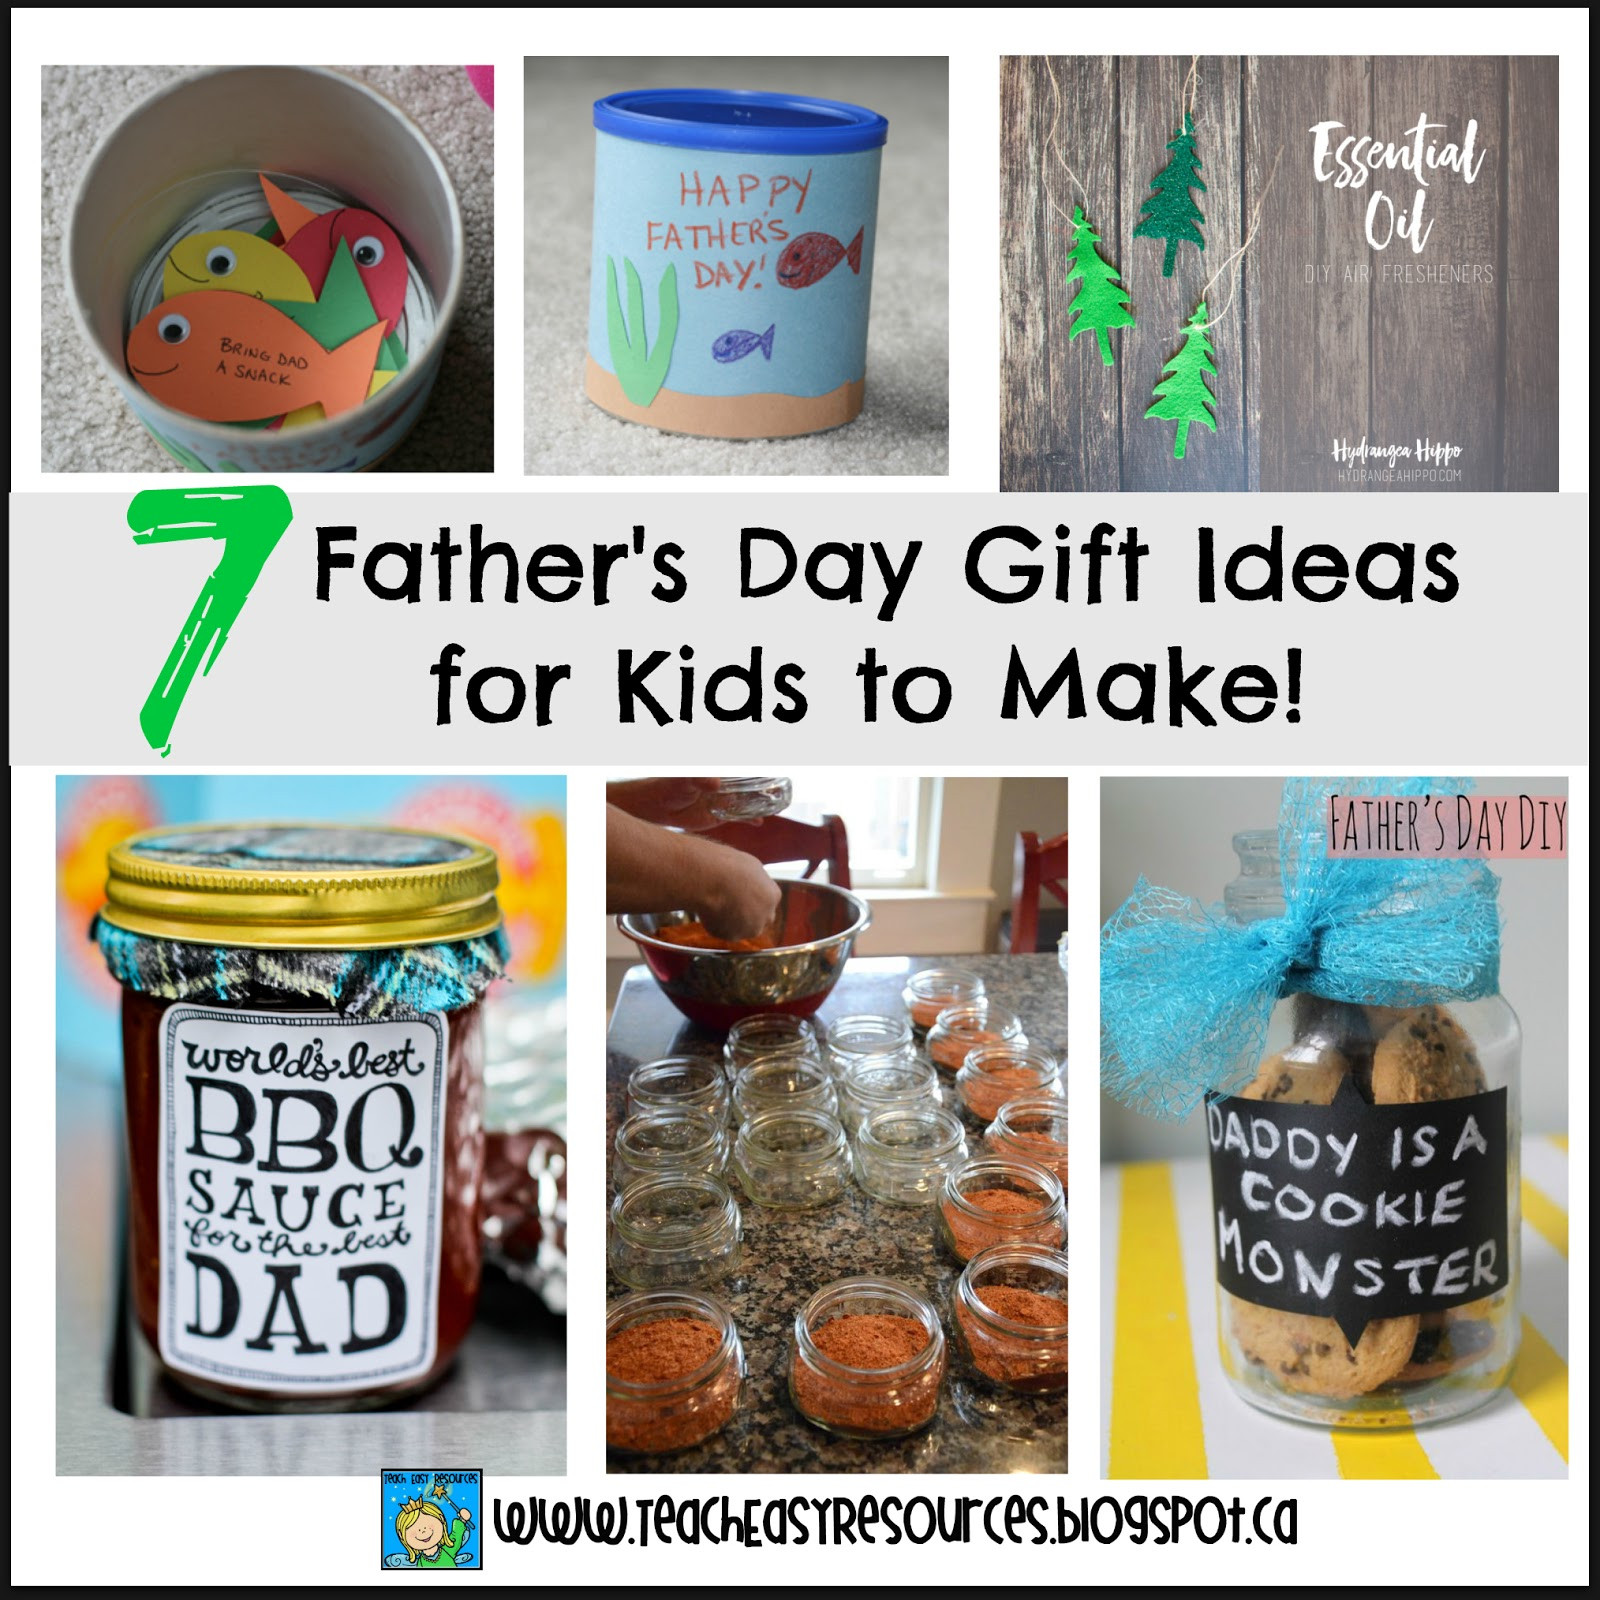 Small Fathers Day Gift Ideas
 Teach Easy Resources Father s Day Gift Ideas that Kids